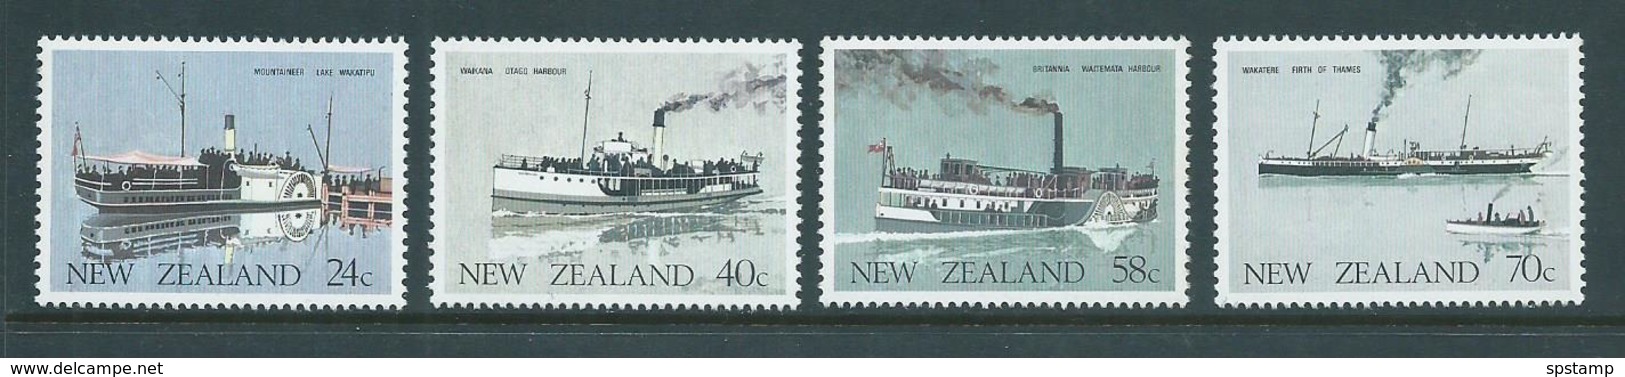 New Zealand 1984 Ships & Boats Set  MNH - Unused Stamps